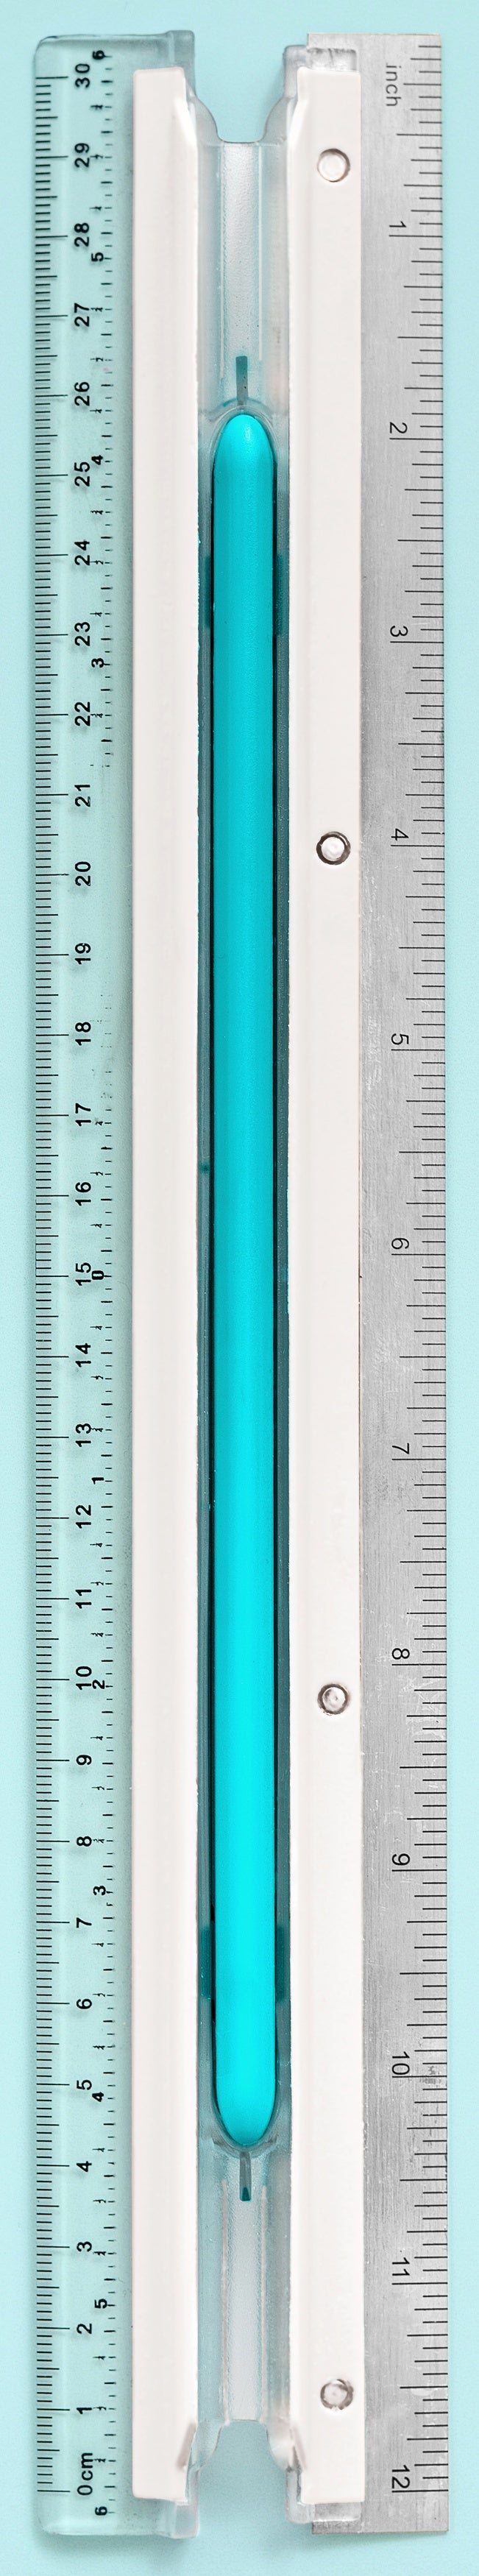 12 Inch Rulers (12ct) – US Novelty